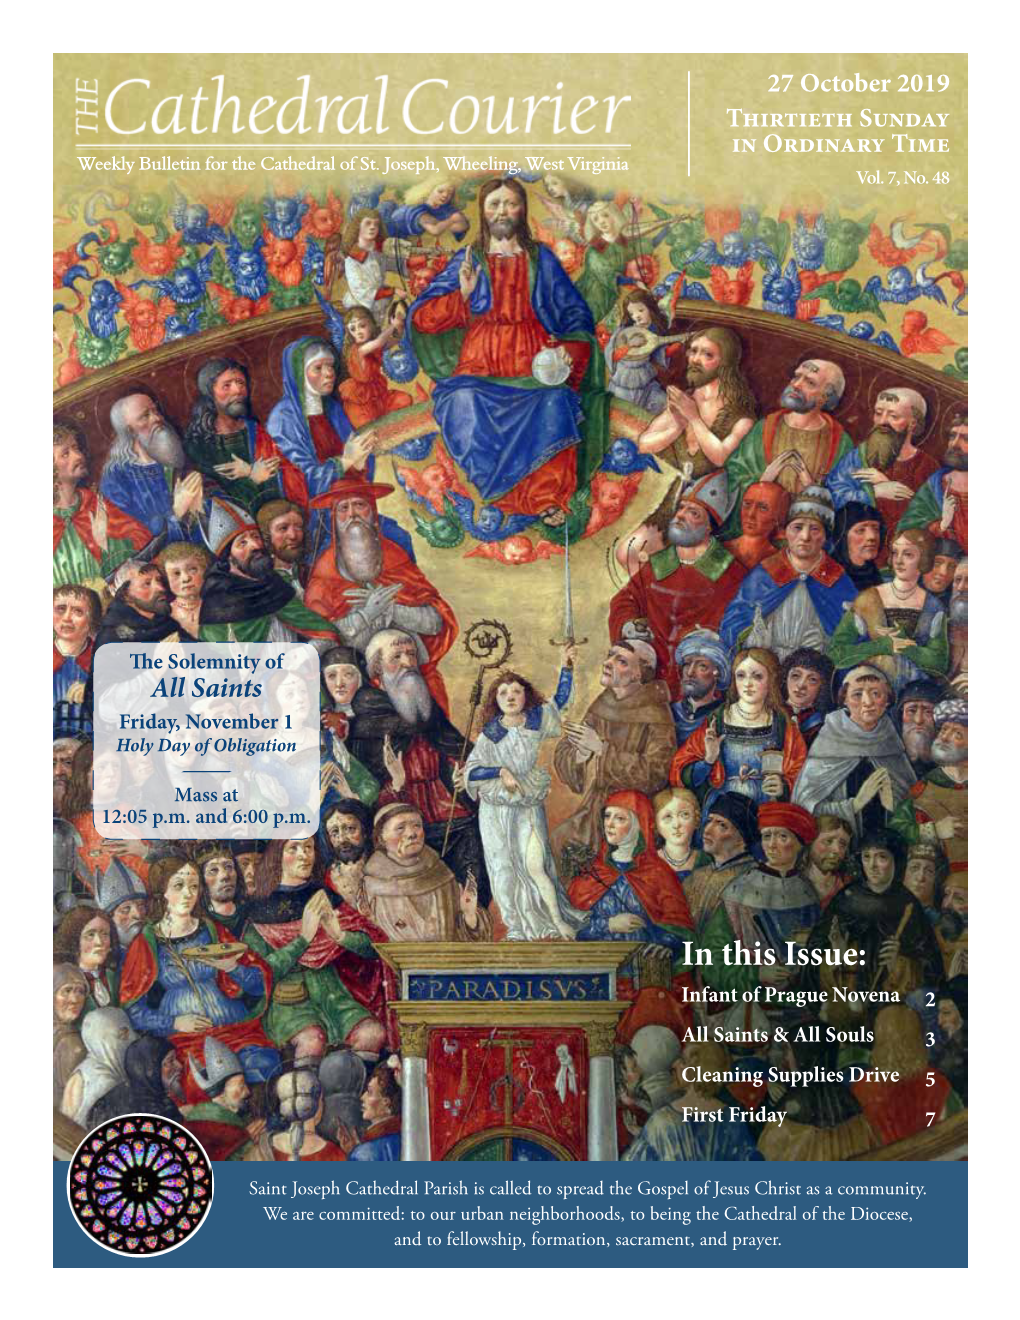 In This Issue: Infant of Prague Novena 2 All Saints & All Souls 3 Cleaning Supplies Drive 5 First Friday 7